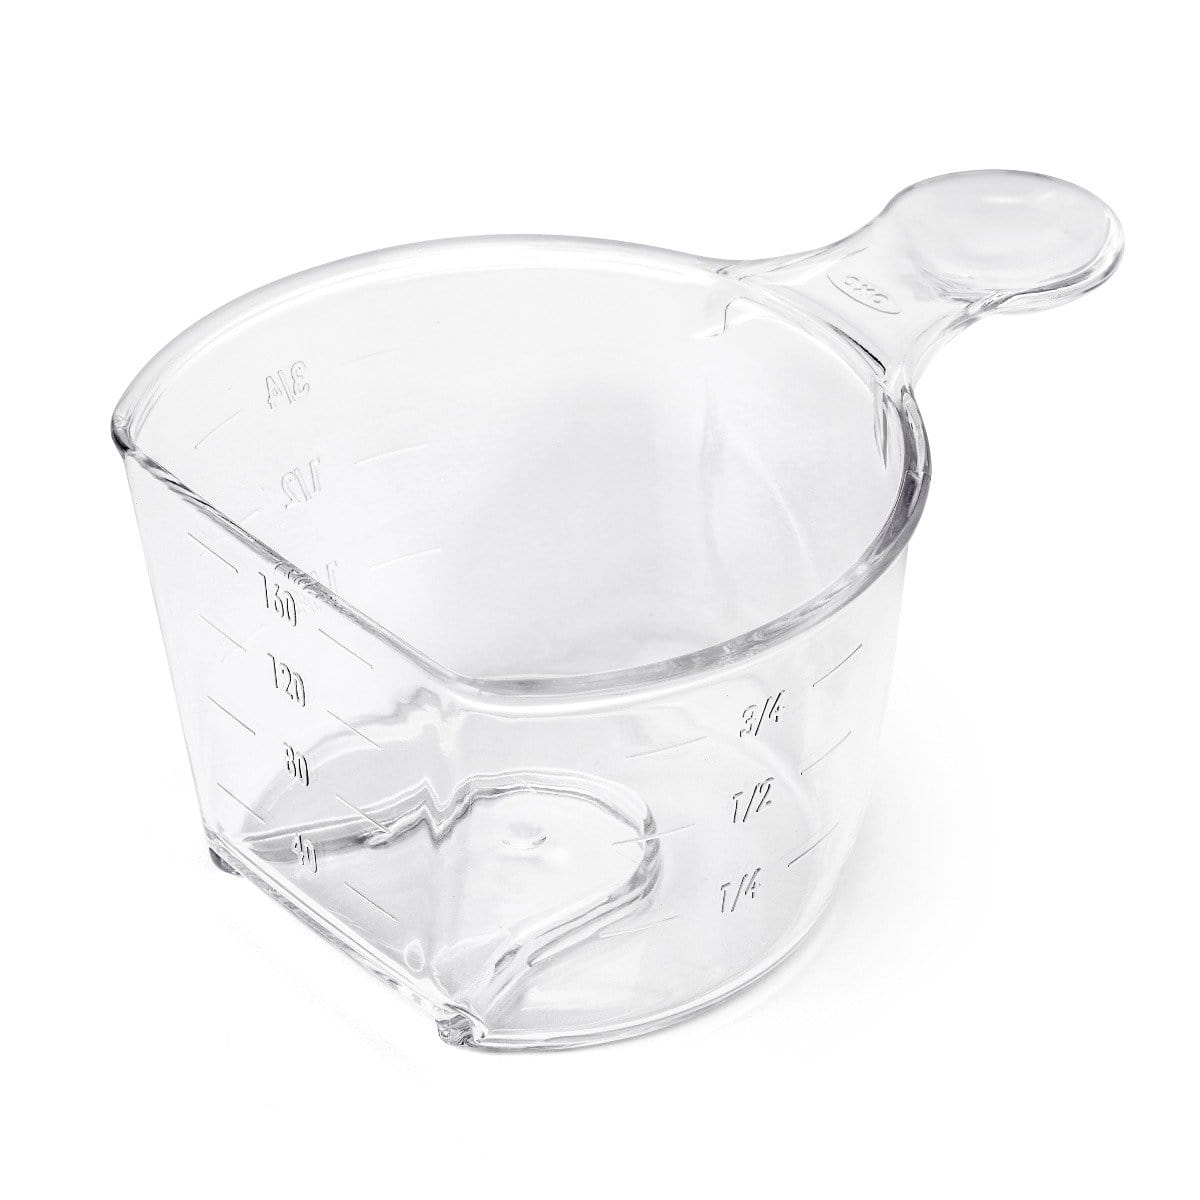 Anchor Hocking 8oz Measuring Cup - Spoons N Spice